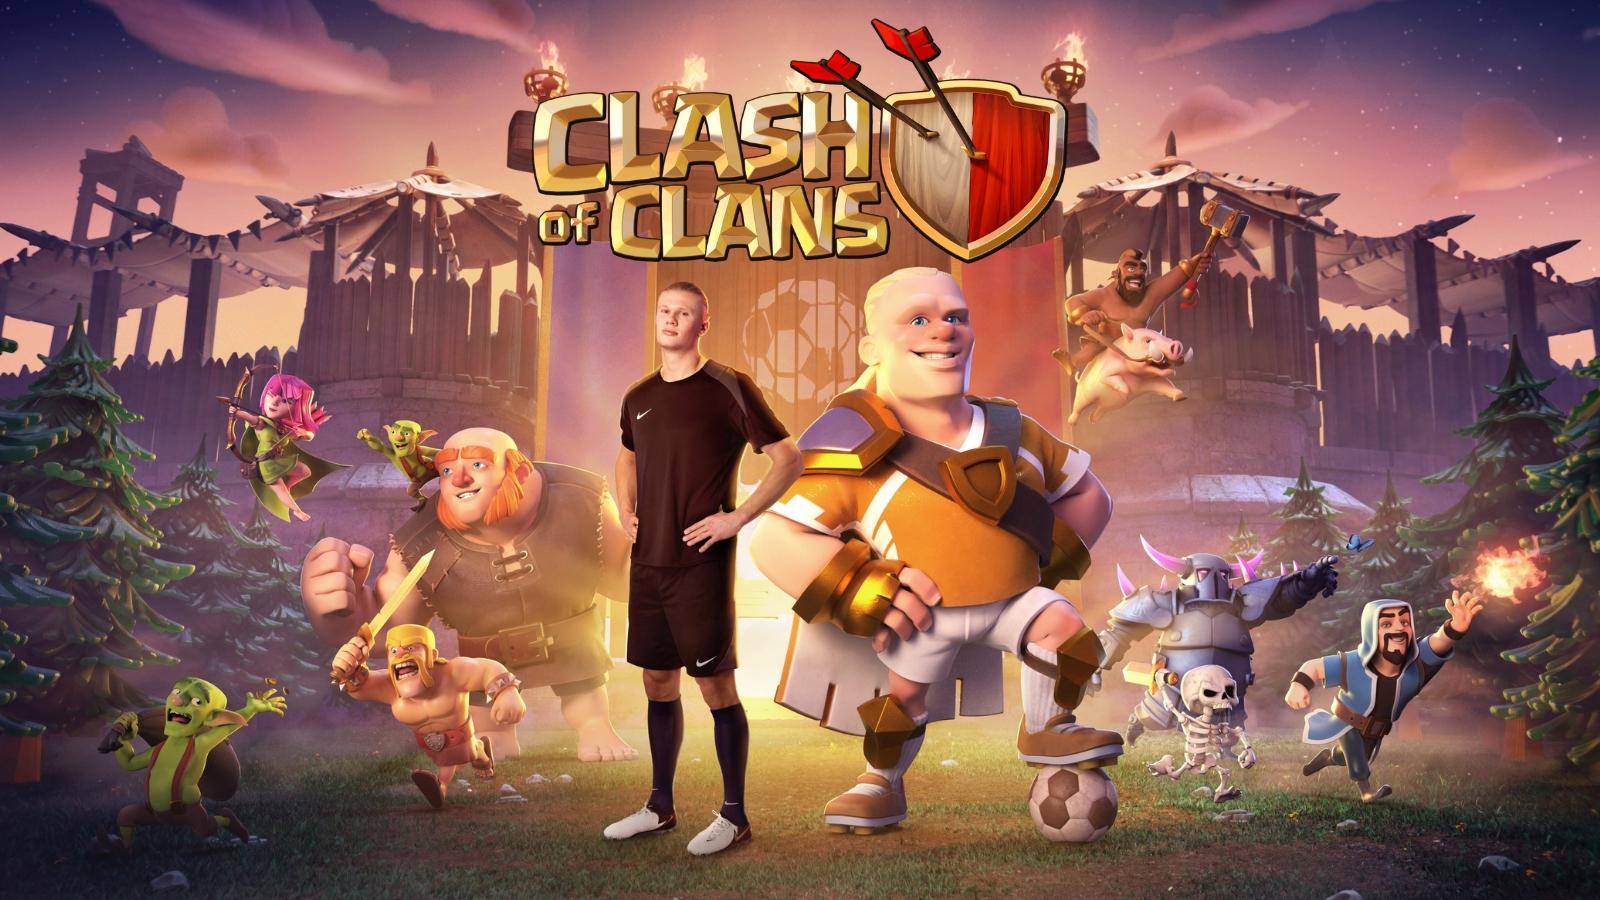 Haaland Clash of Clans collab cover art